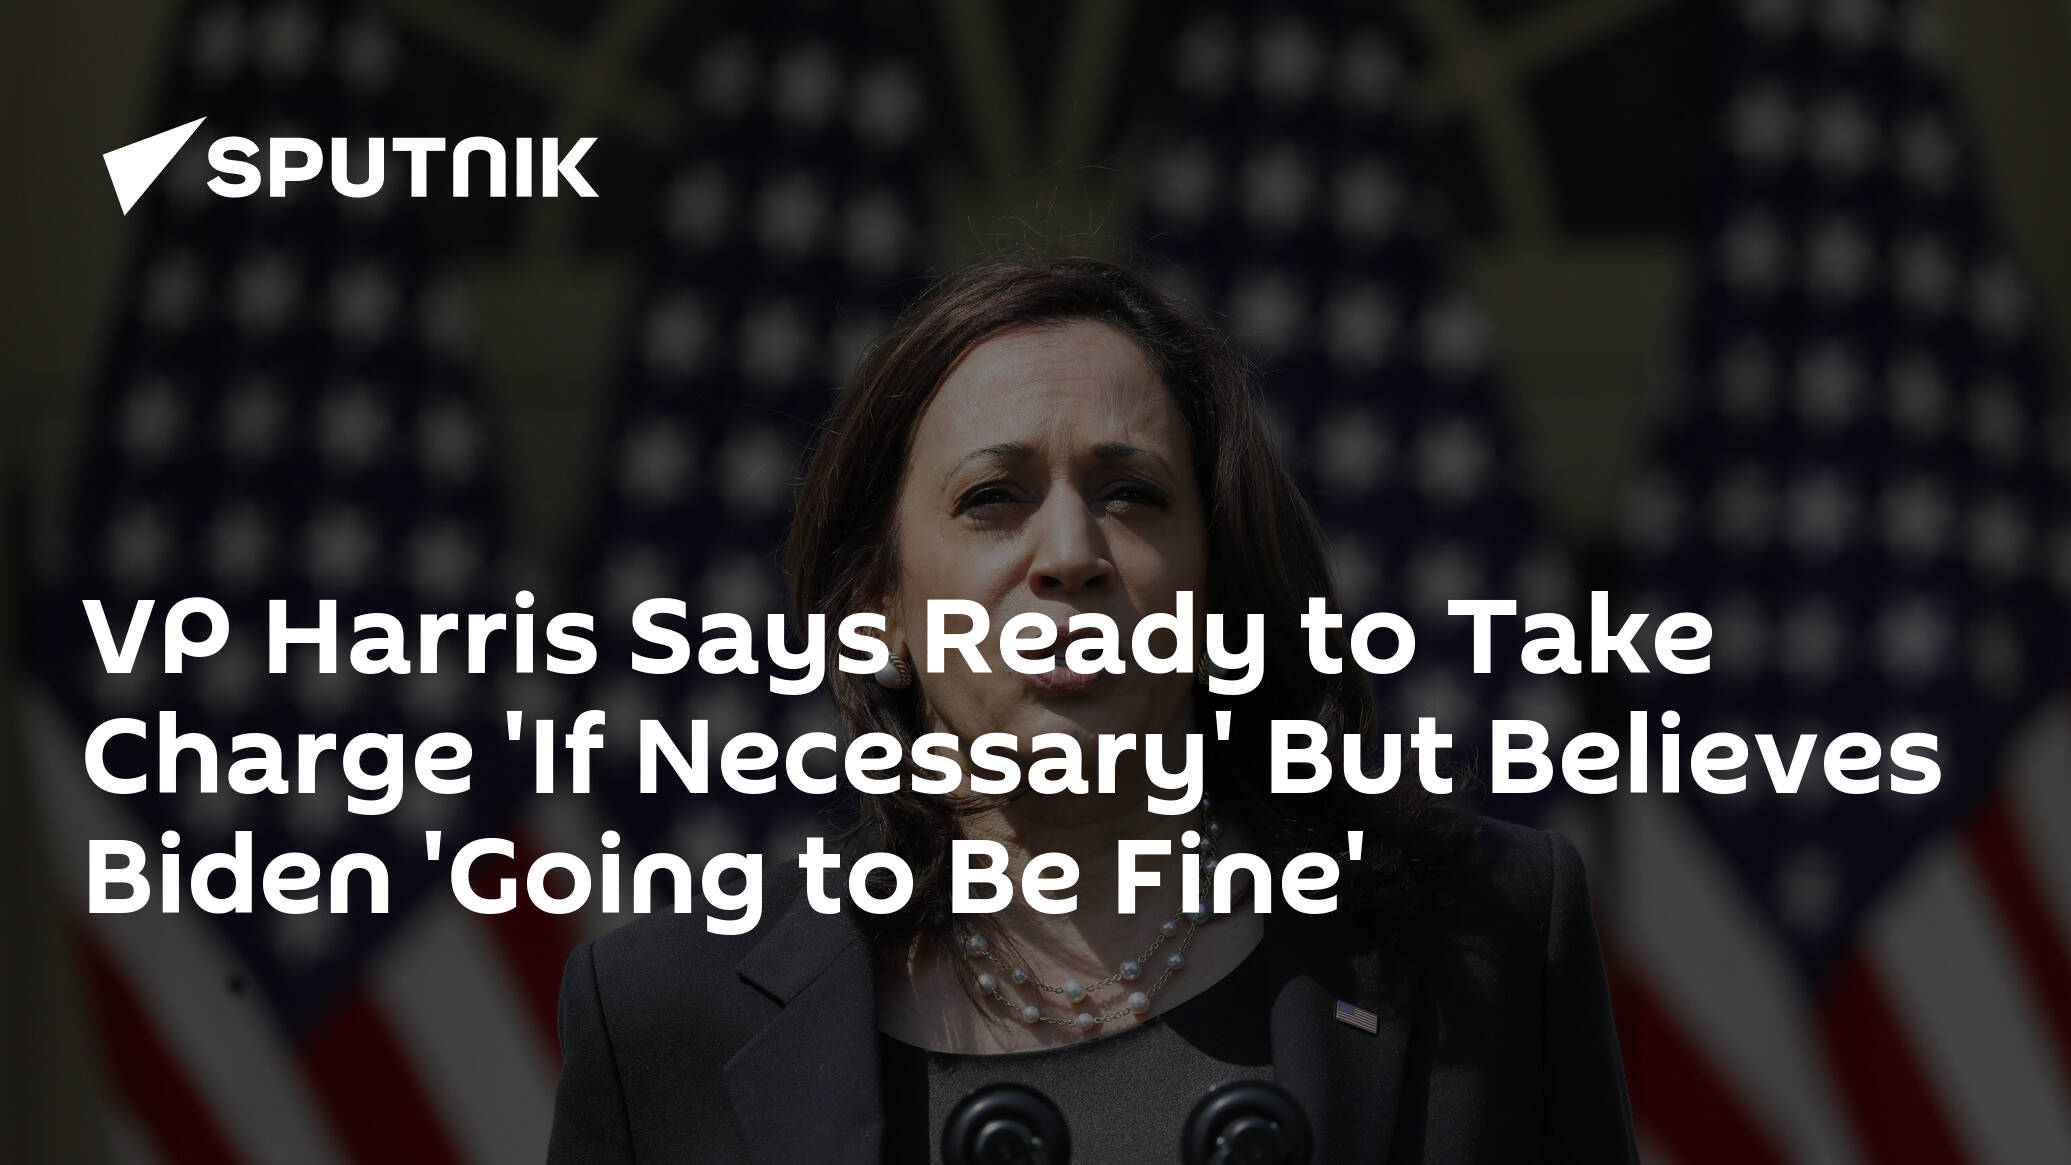 VP Harris Says Ready to Take Charge 'If Necessary' But Believes Biden 'Going to Be Fine'